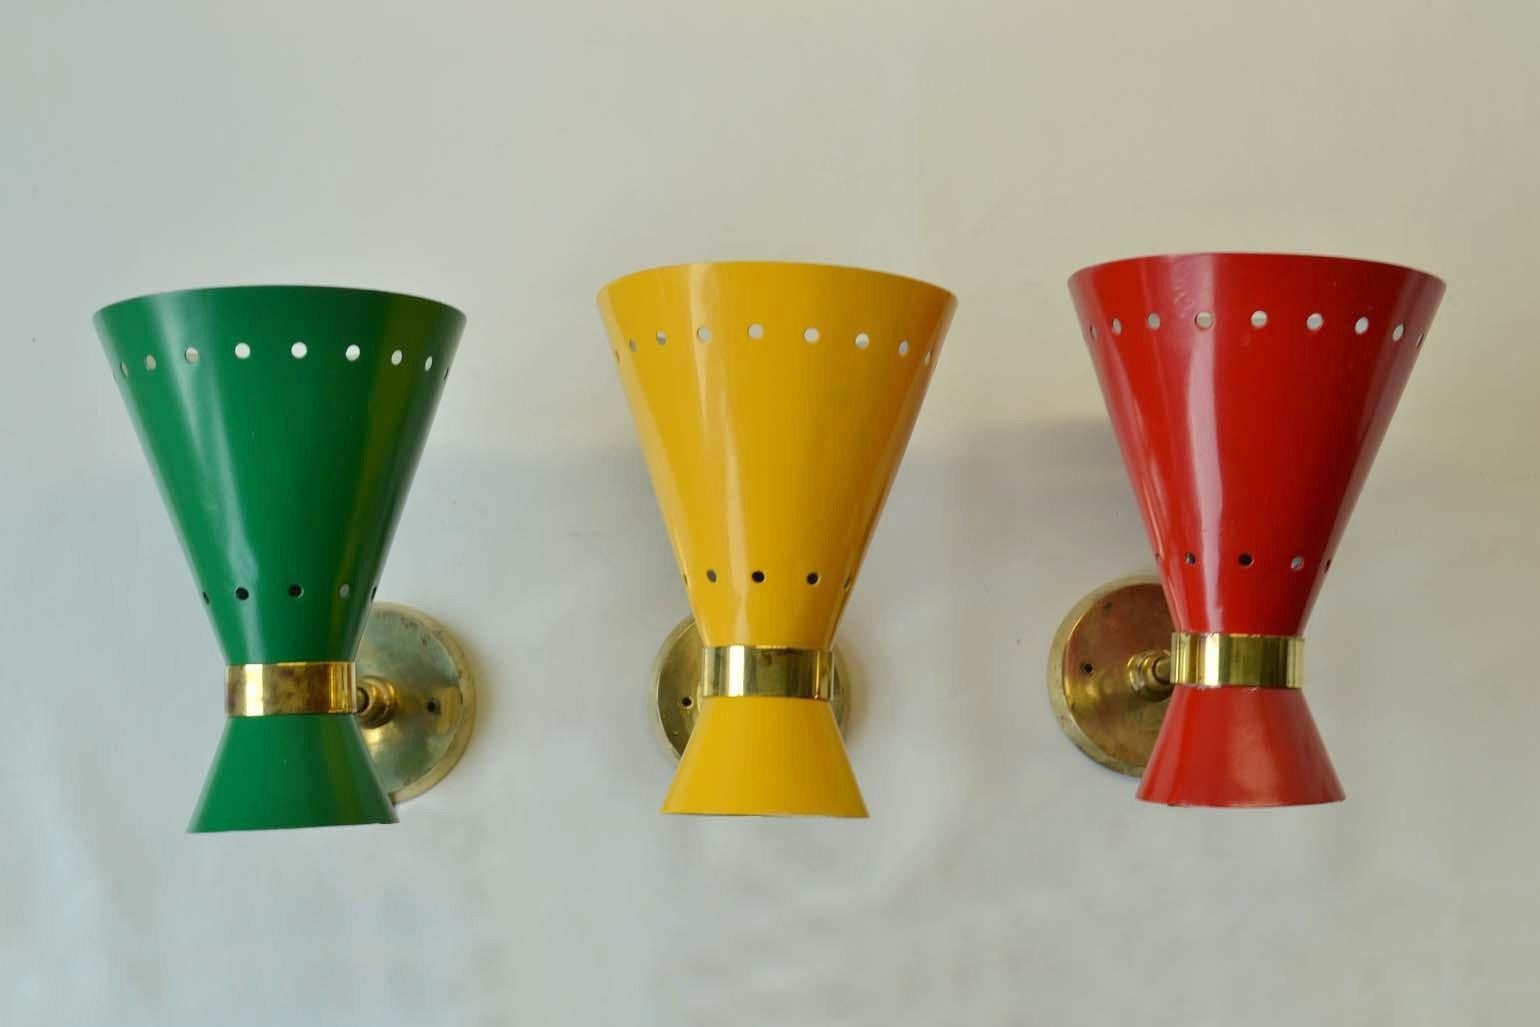 Three original Mid-Century Modern Italian red yellow & green enameled aluminum & brass hourglass shape sconces with adjustable joints to angle the light source. These Italian enameled sconces attributed to Stilnovo were produced in the 1950s-1960s